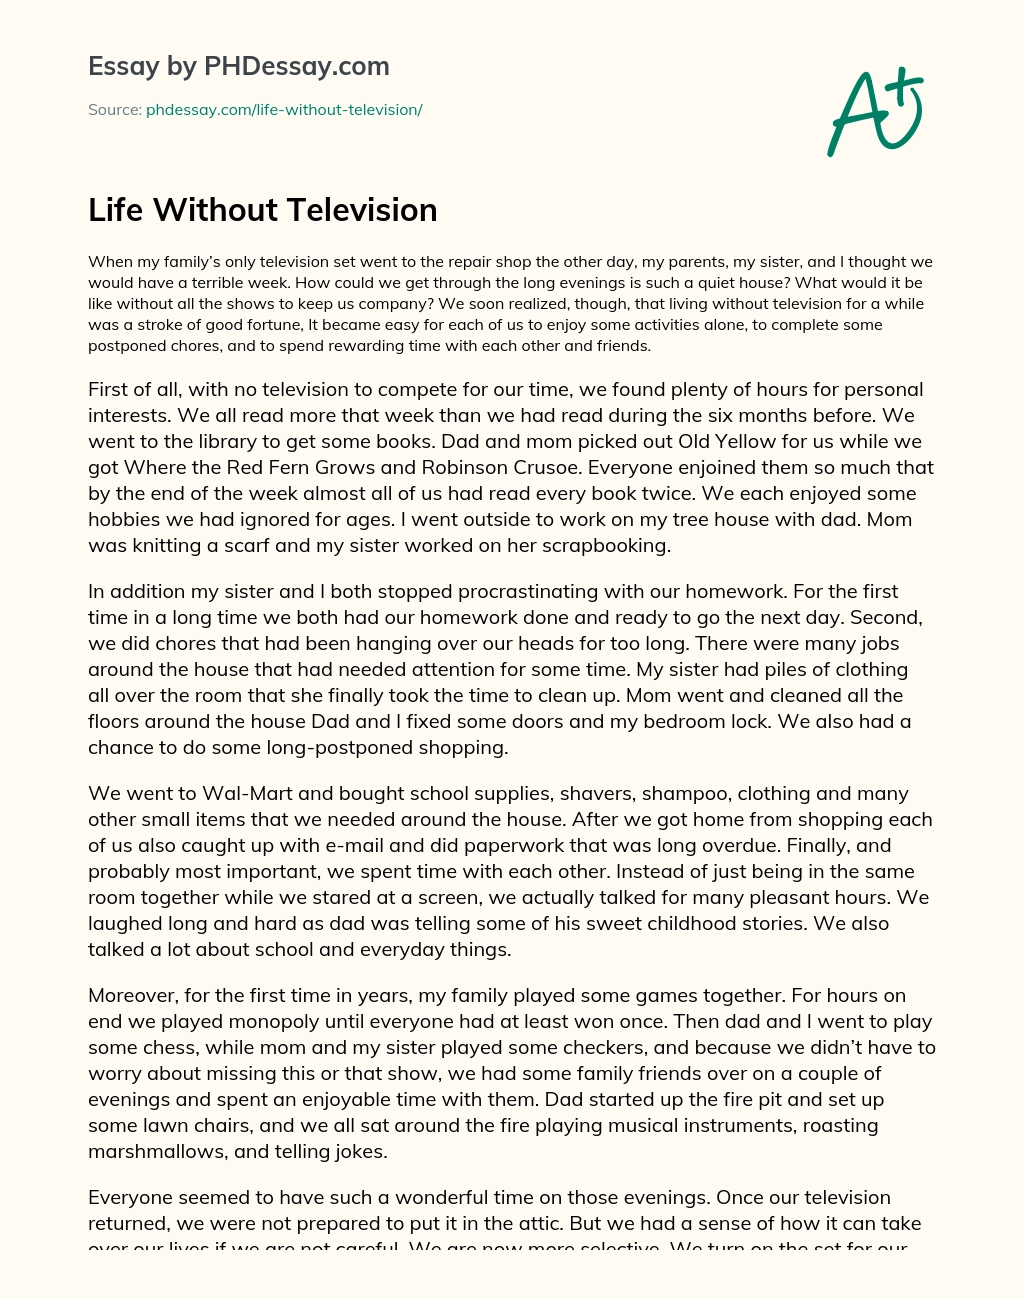 essay on life without television